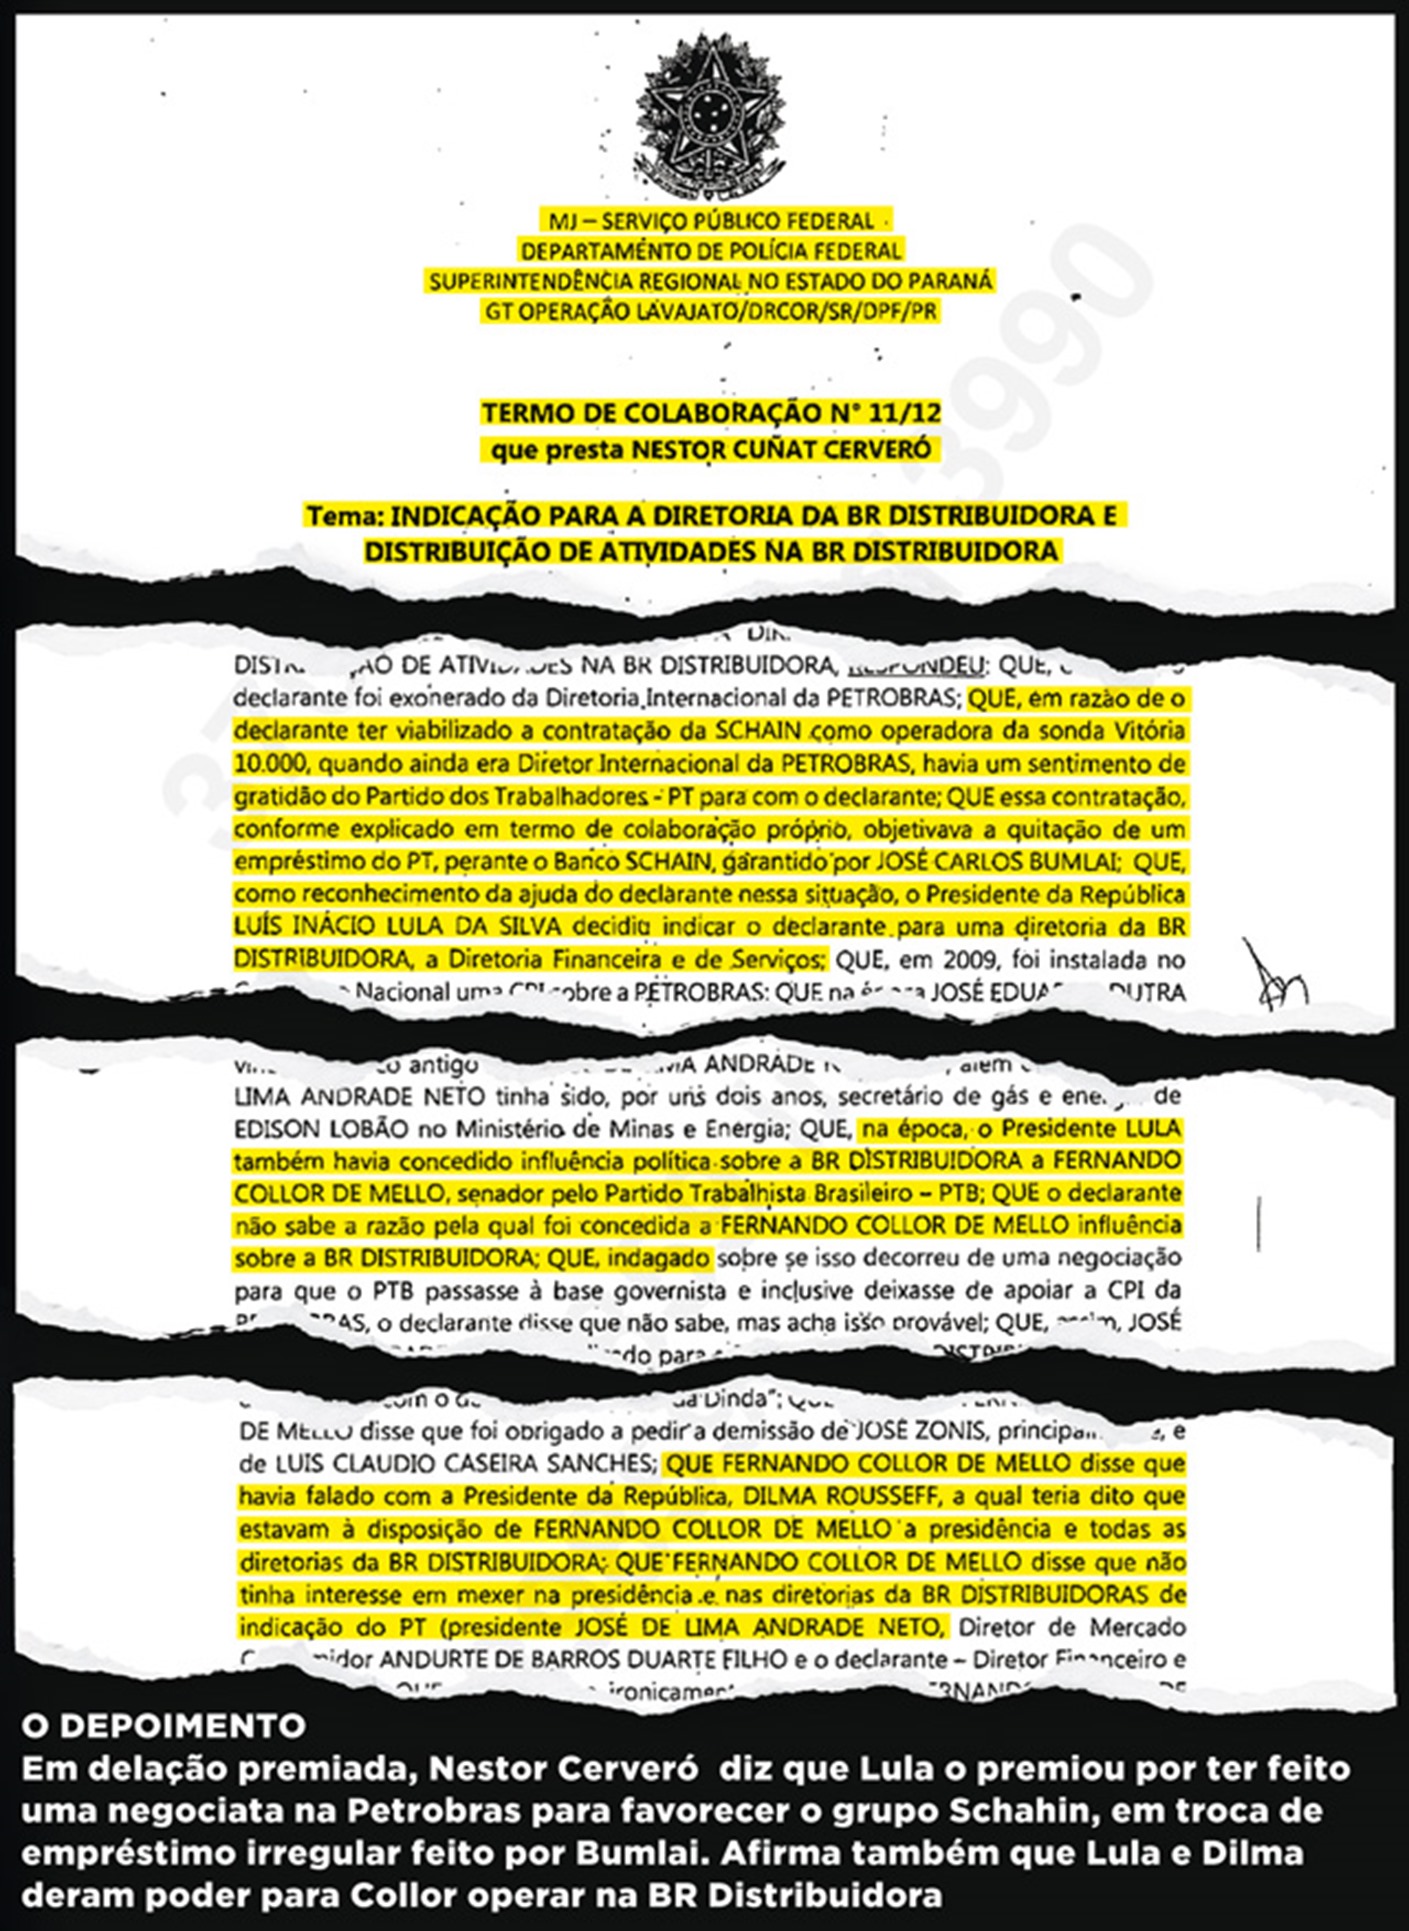 IE2406pag32a34_Lula/Dilma.indd